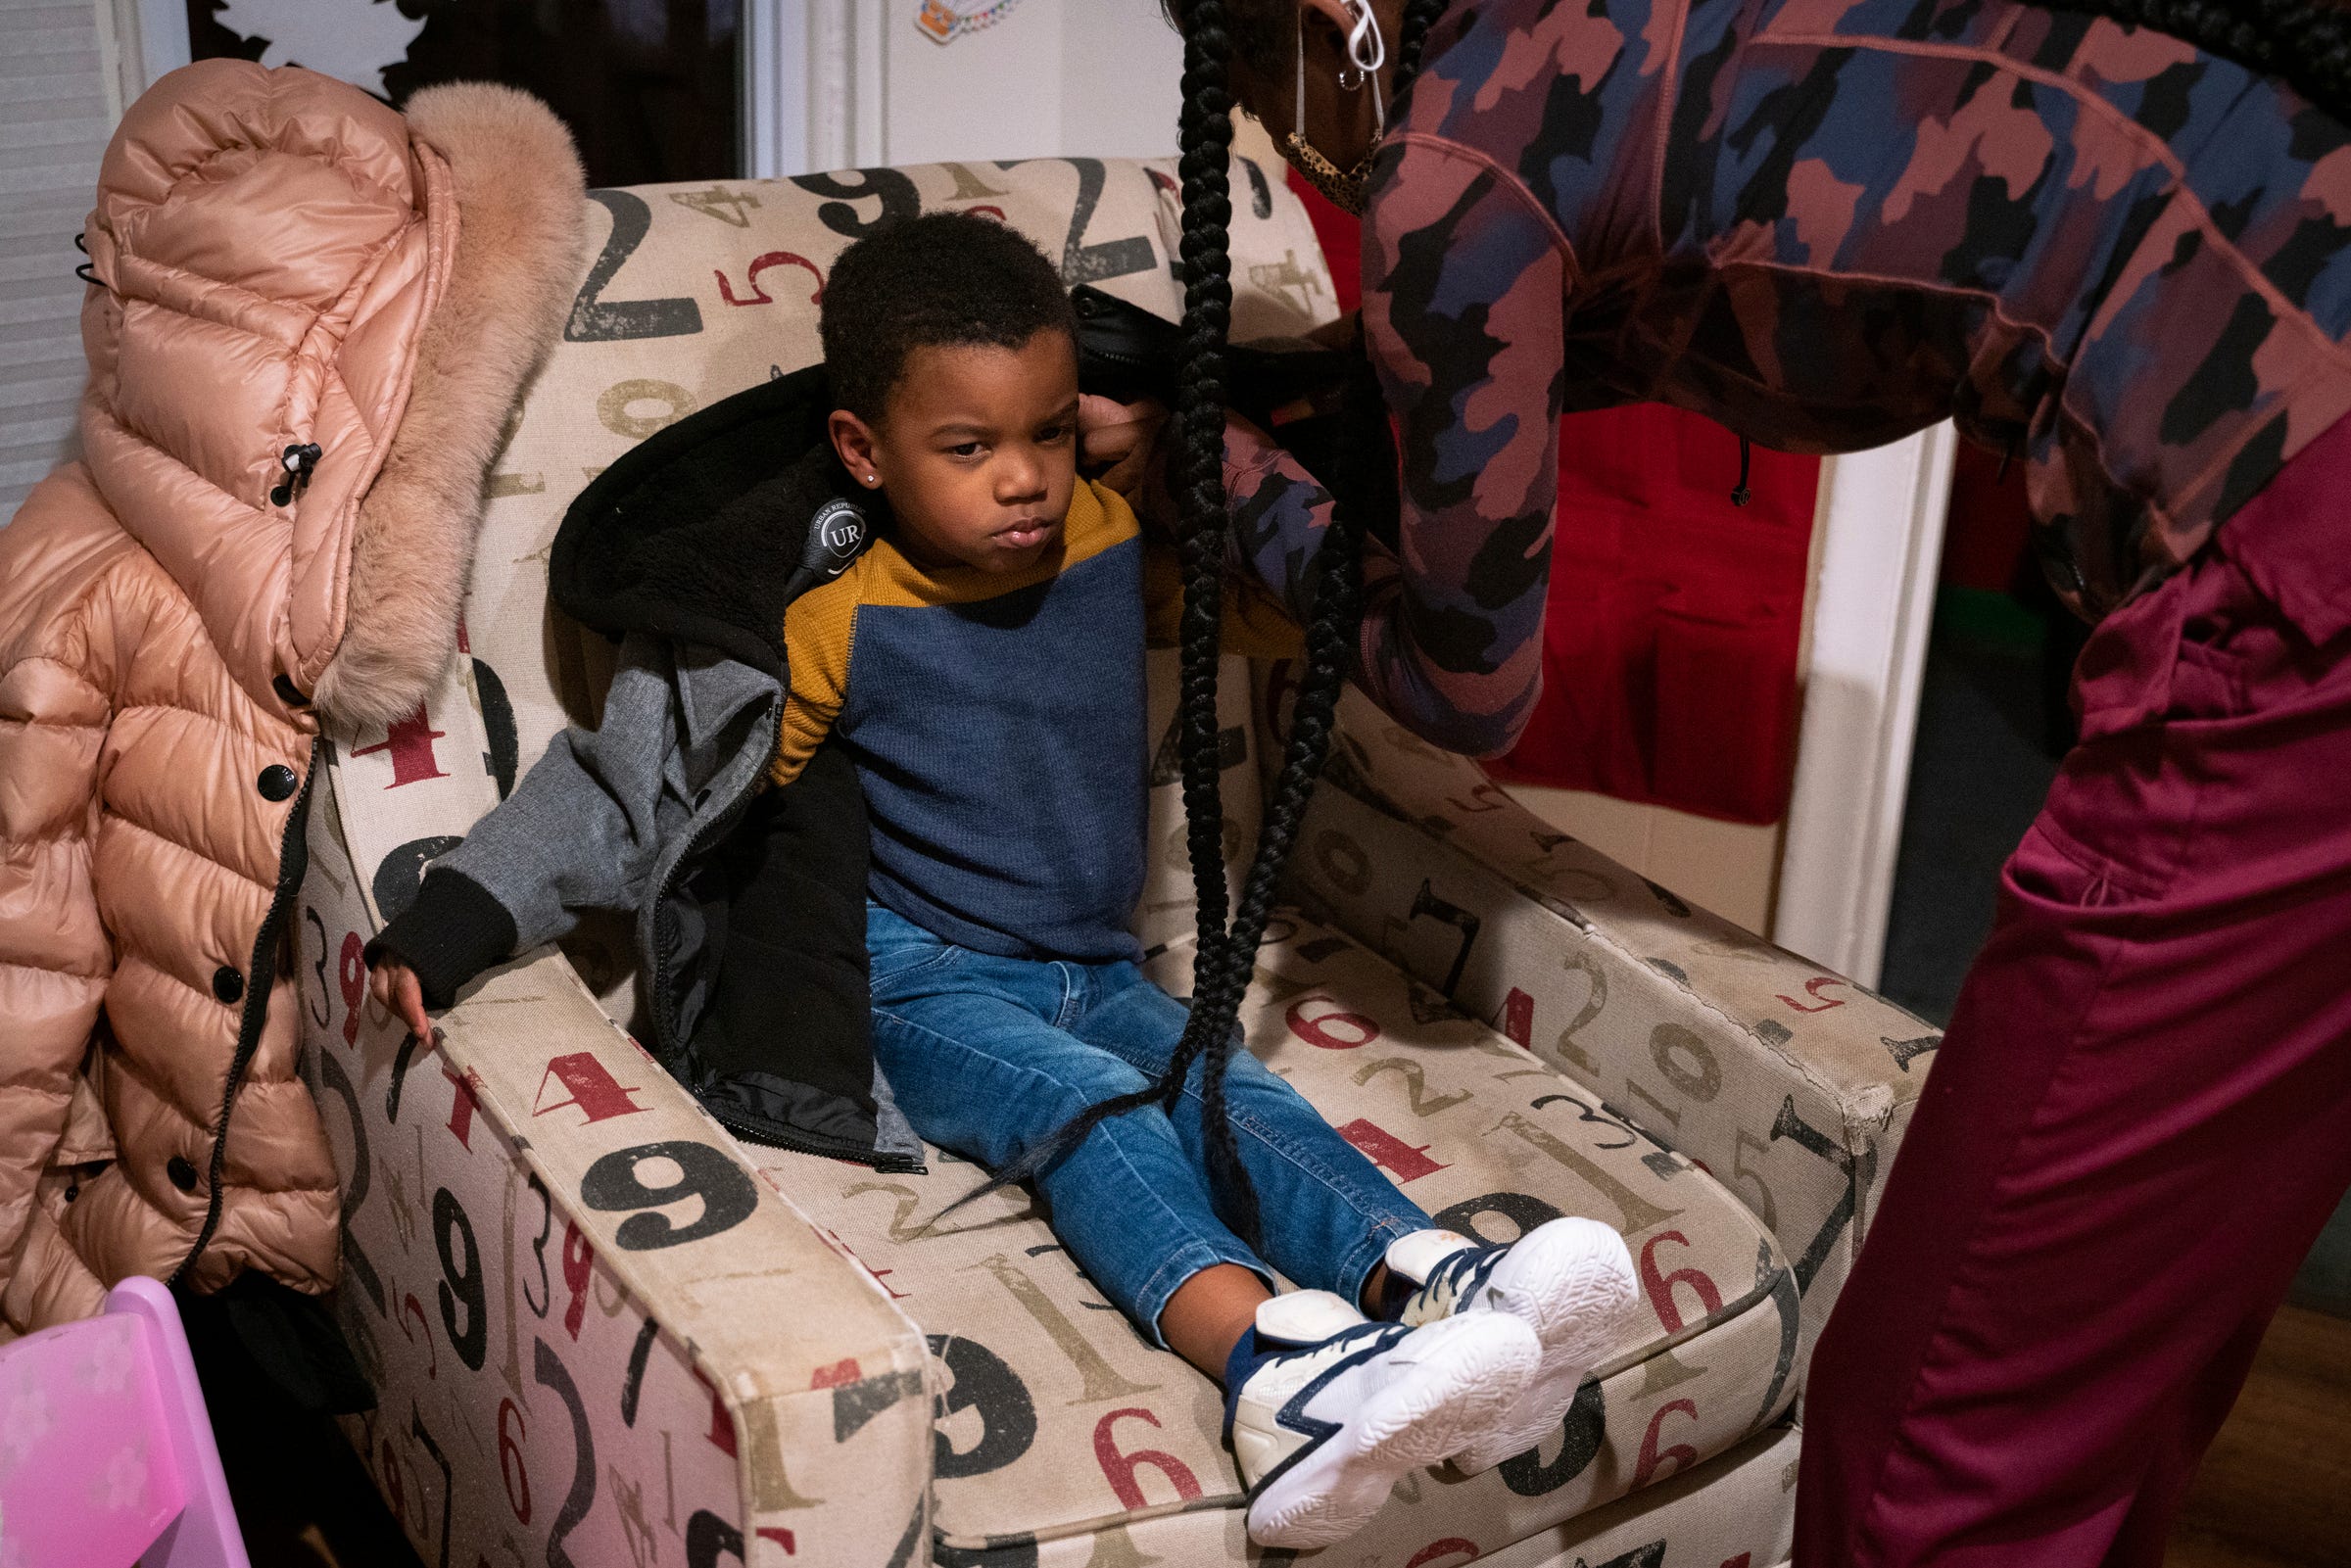 DeAndre Terry, 3, sits up while half asleep, as Arionne Brock, 21, helps put his jacket on during a late night at Angels of Essence Child Care Centre in Detroit on Thursday, Oct. 20, 2022.